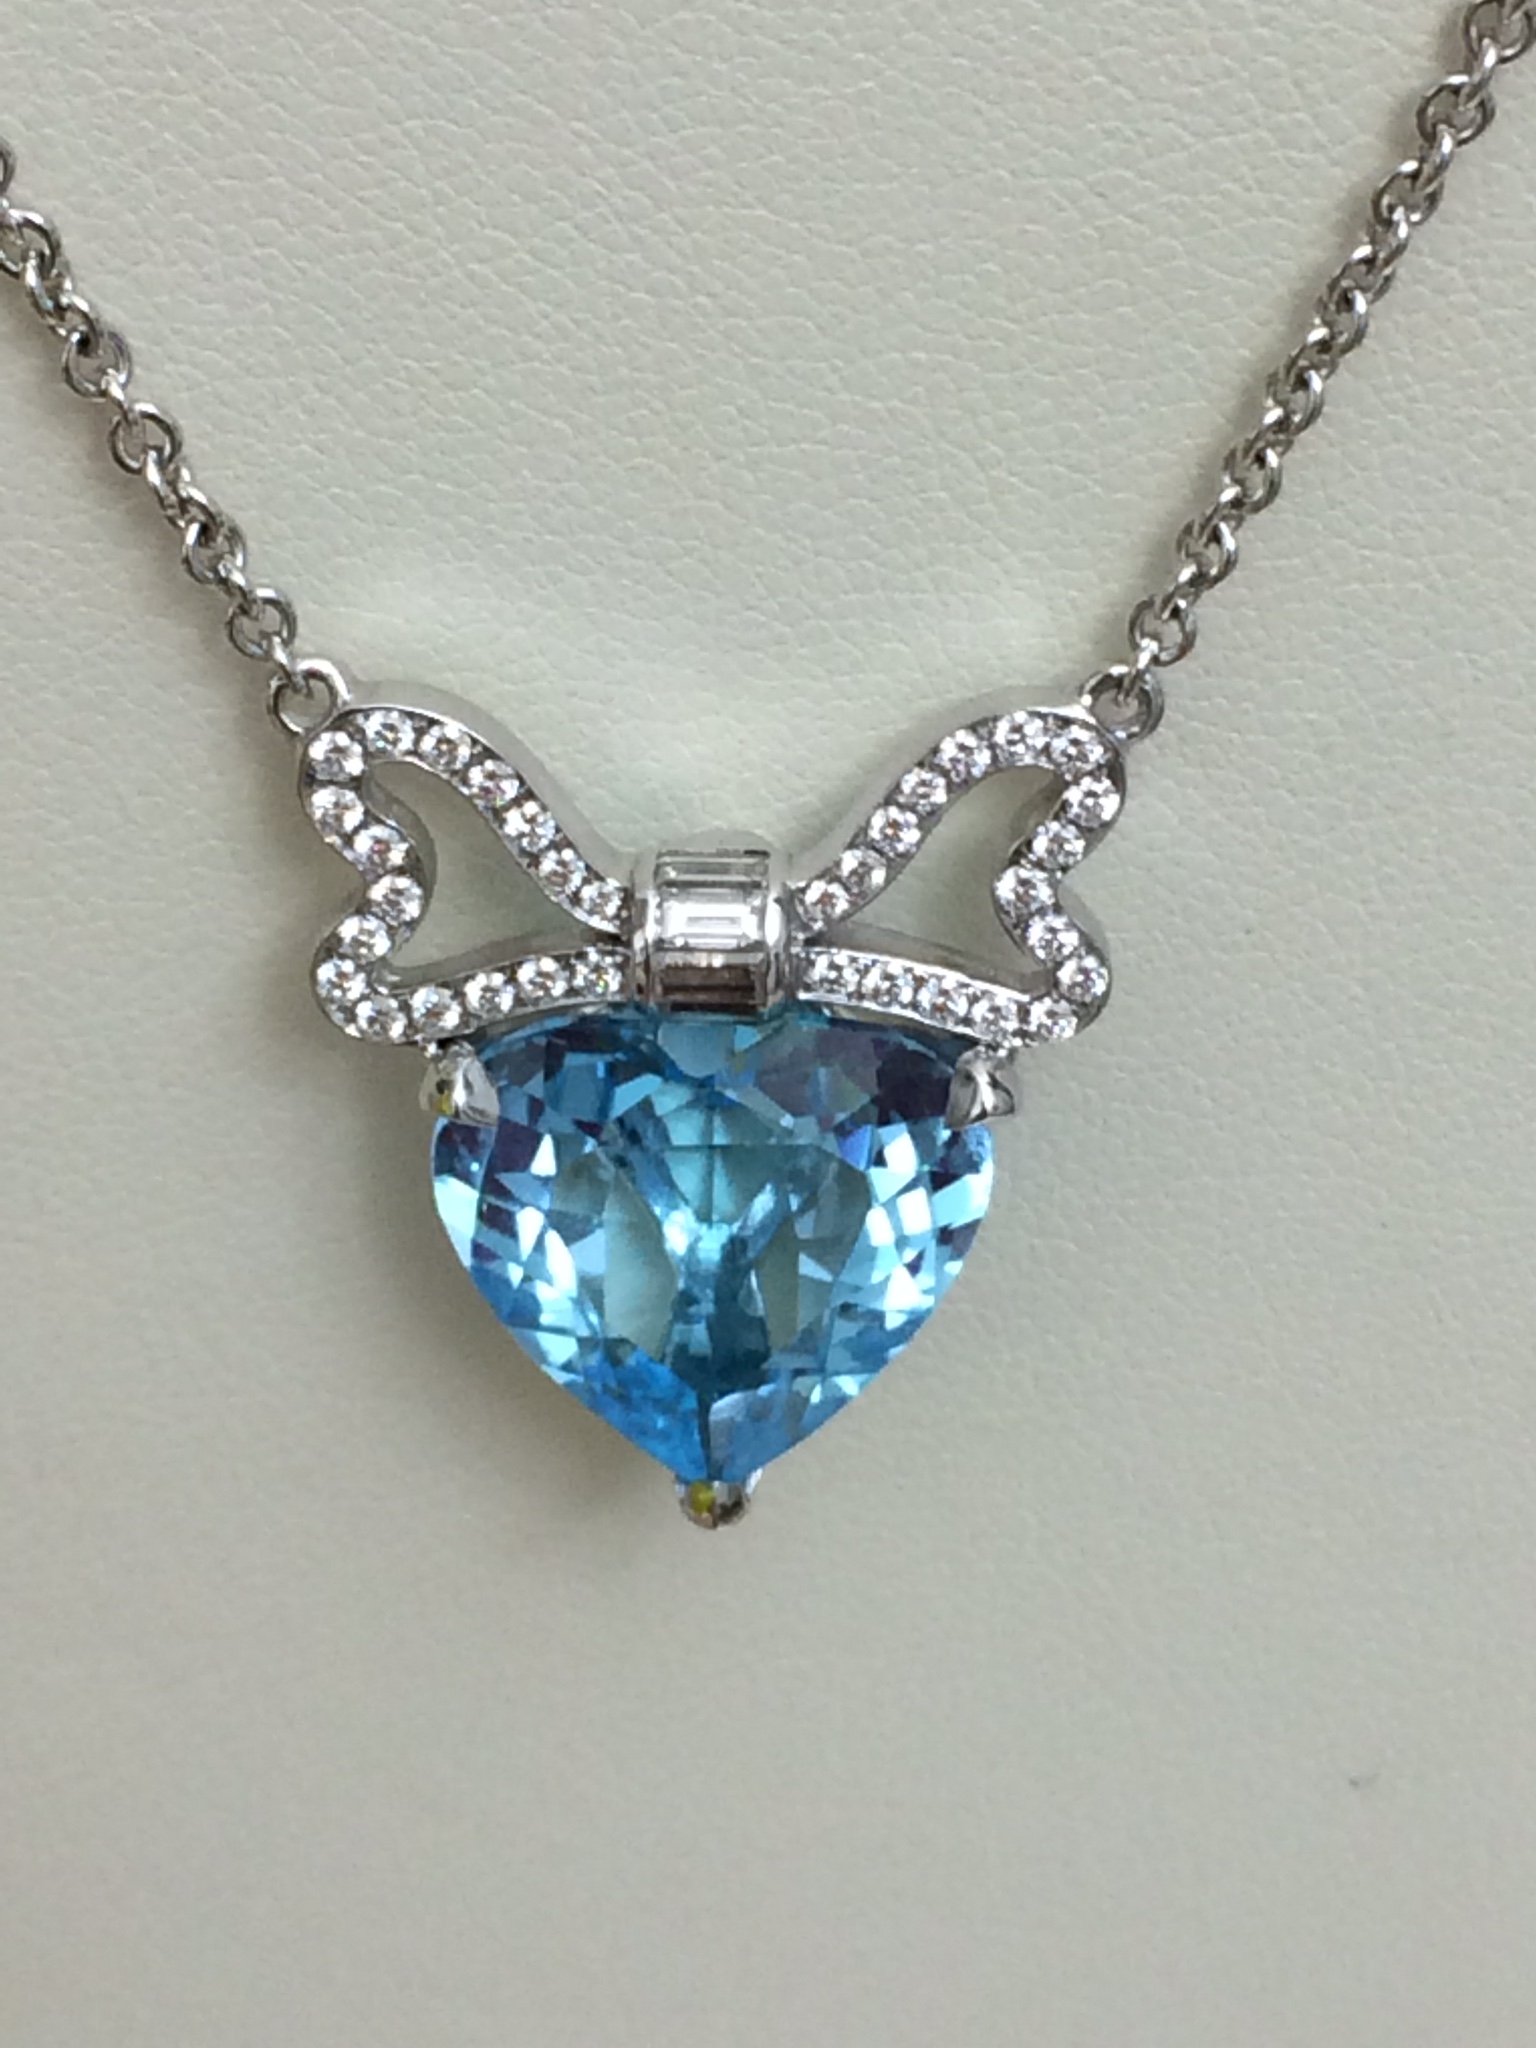 14K White Gold Necklace with Blue Topaz and Diamonds